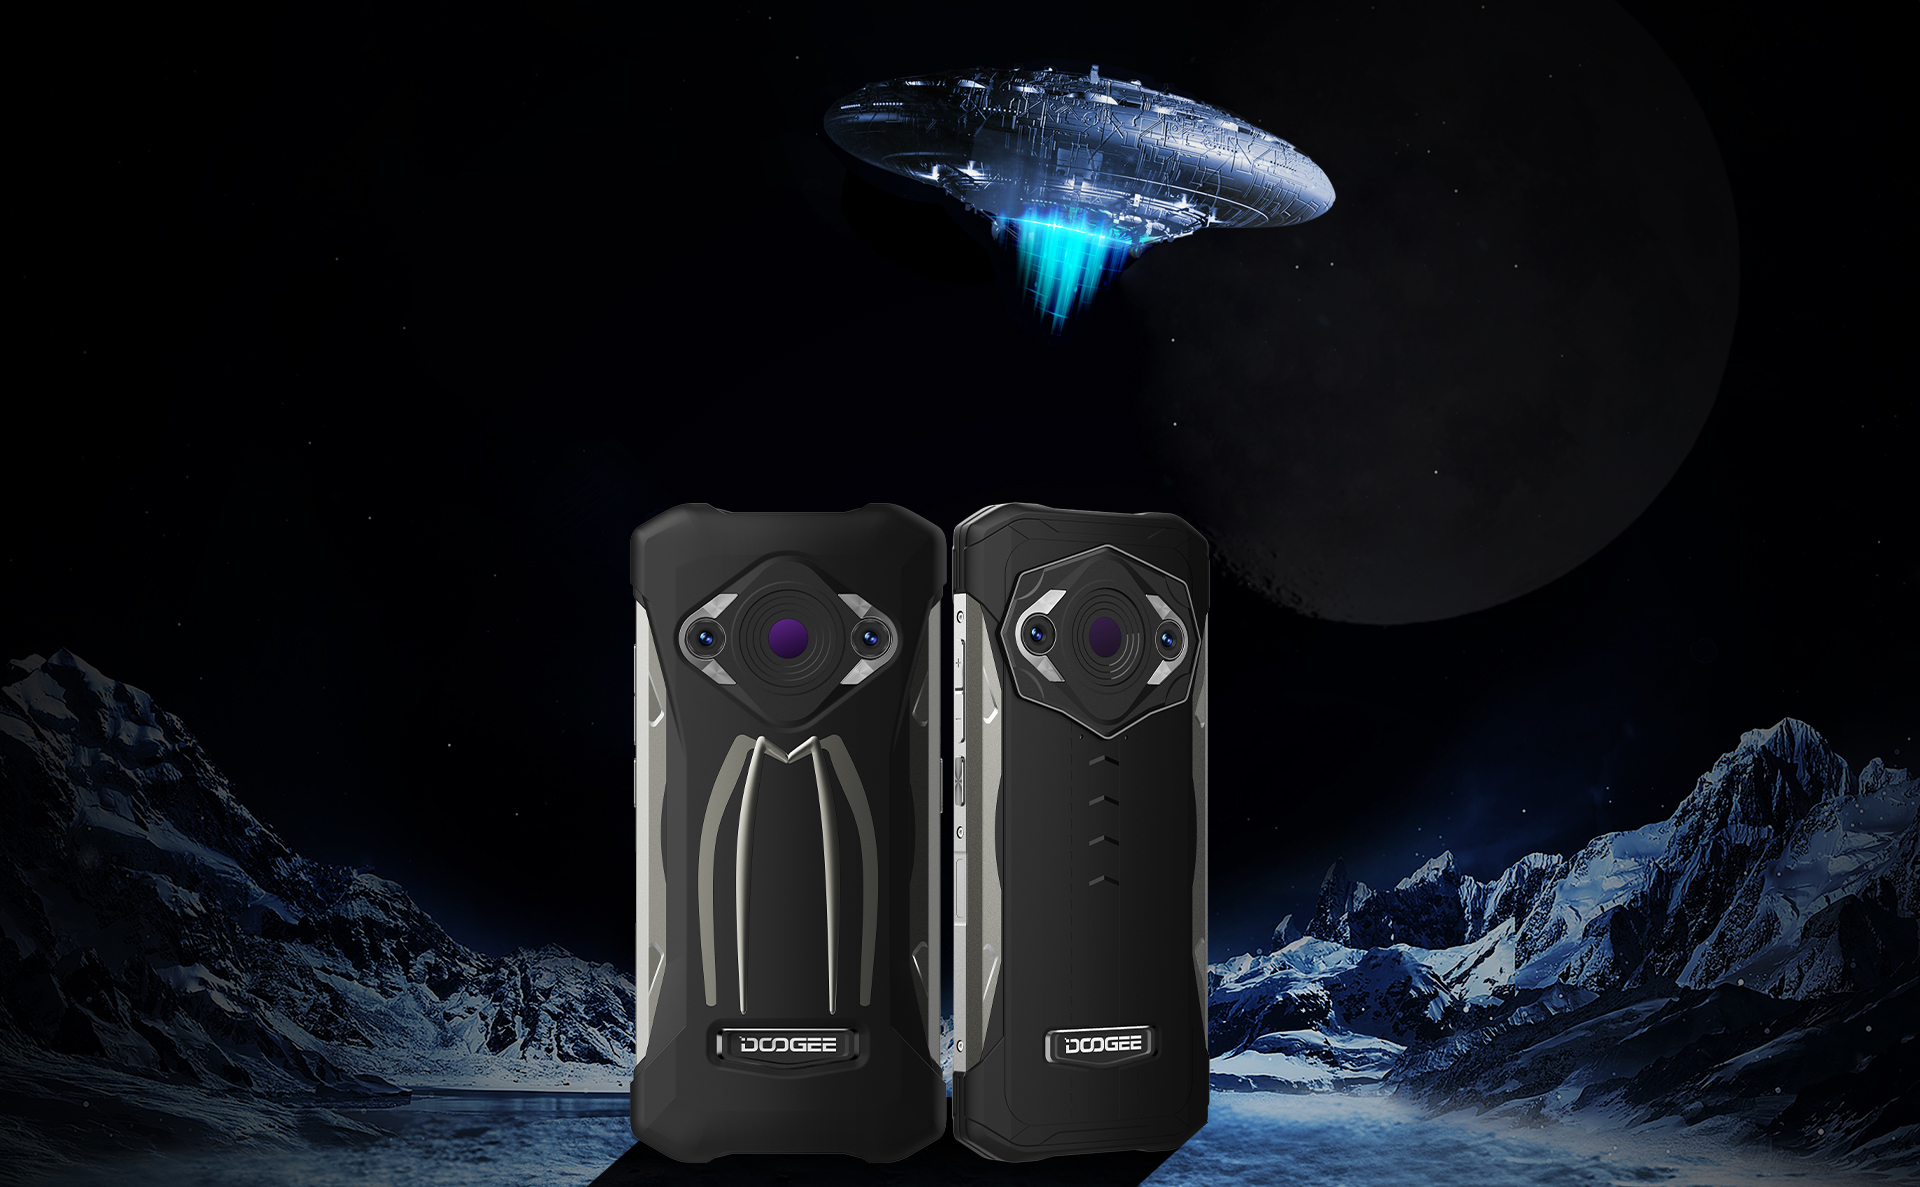 DOOGEE S98 Pro 8GB+256GB 4G Rugged Smartphone Android 12 Thermal Imaging  IP68